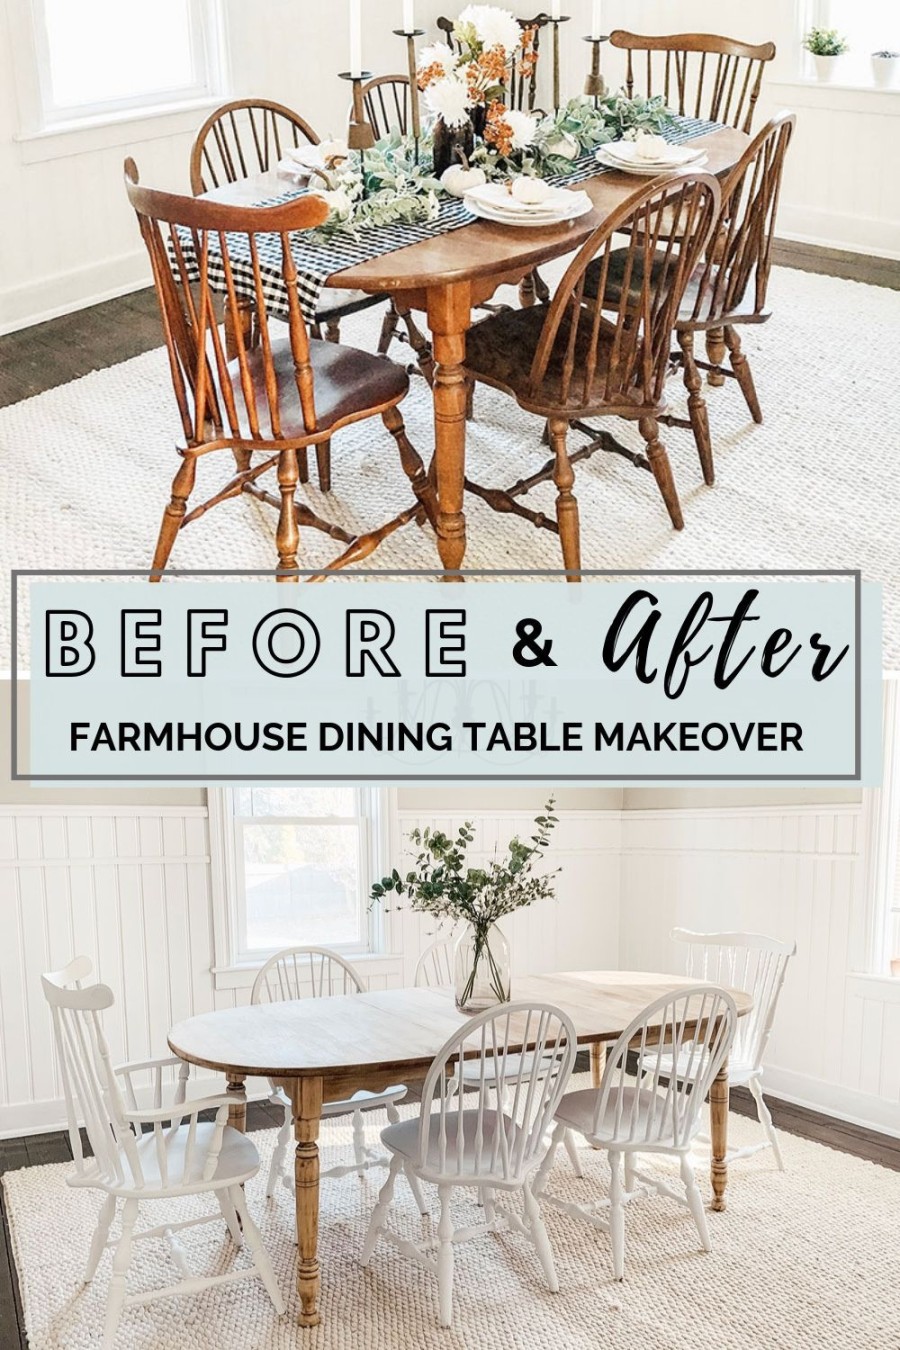 DIY Dining Room Table Makeover - Micheala Diane Designs